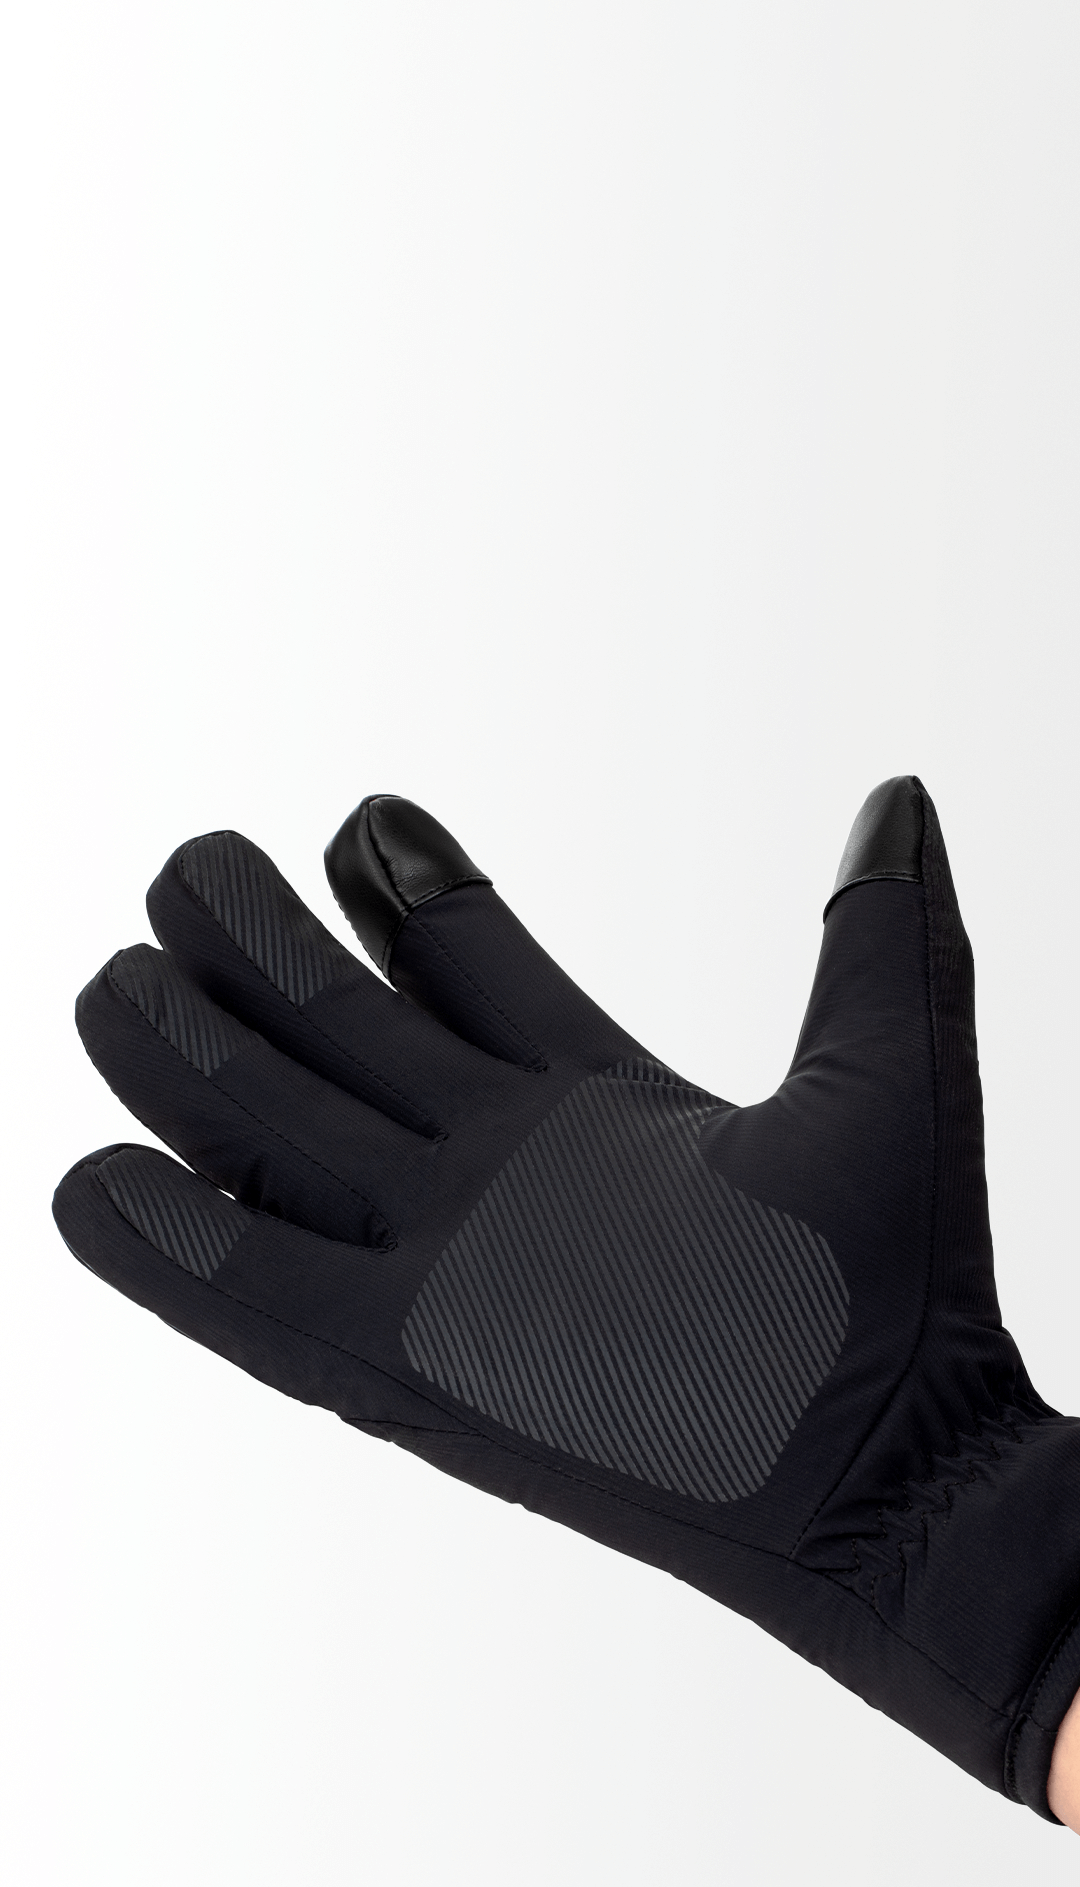  Electric Scooter Riding Gloves